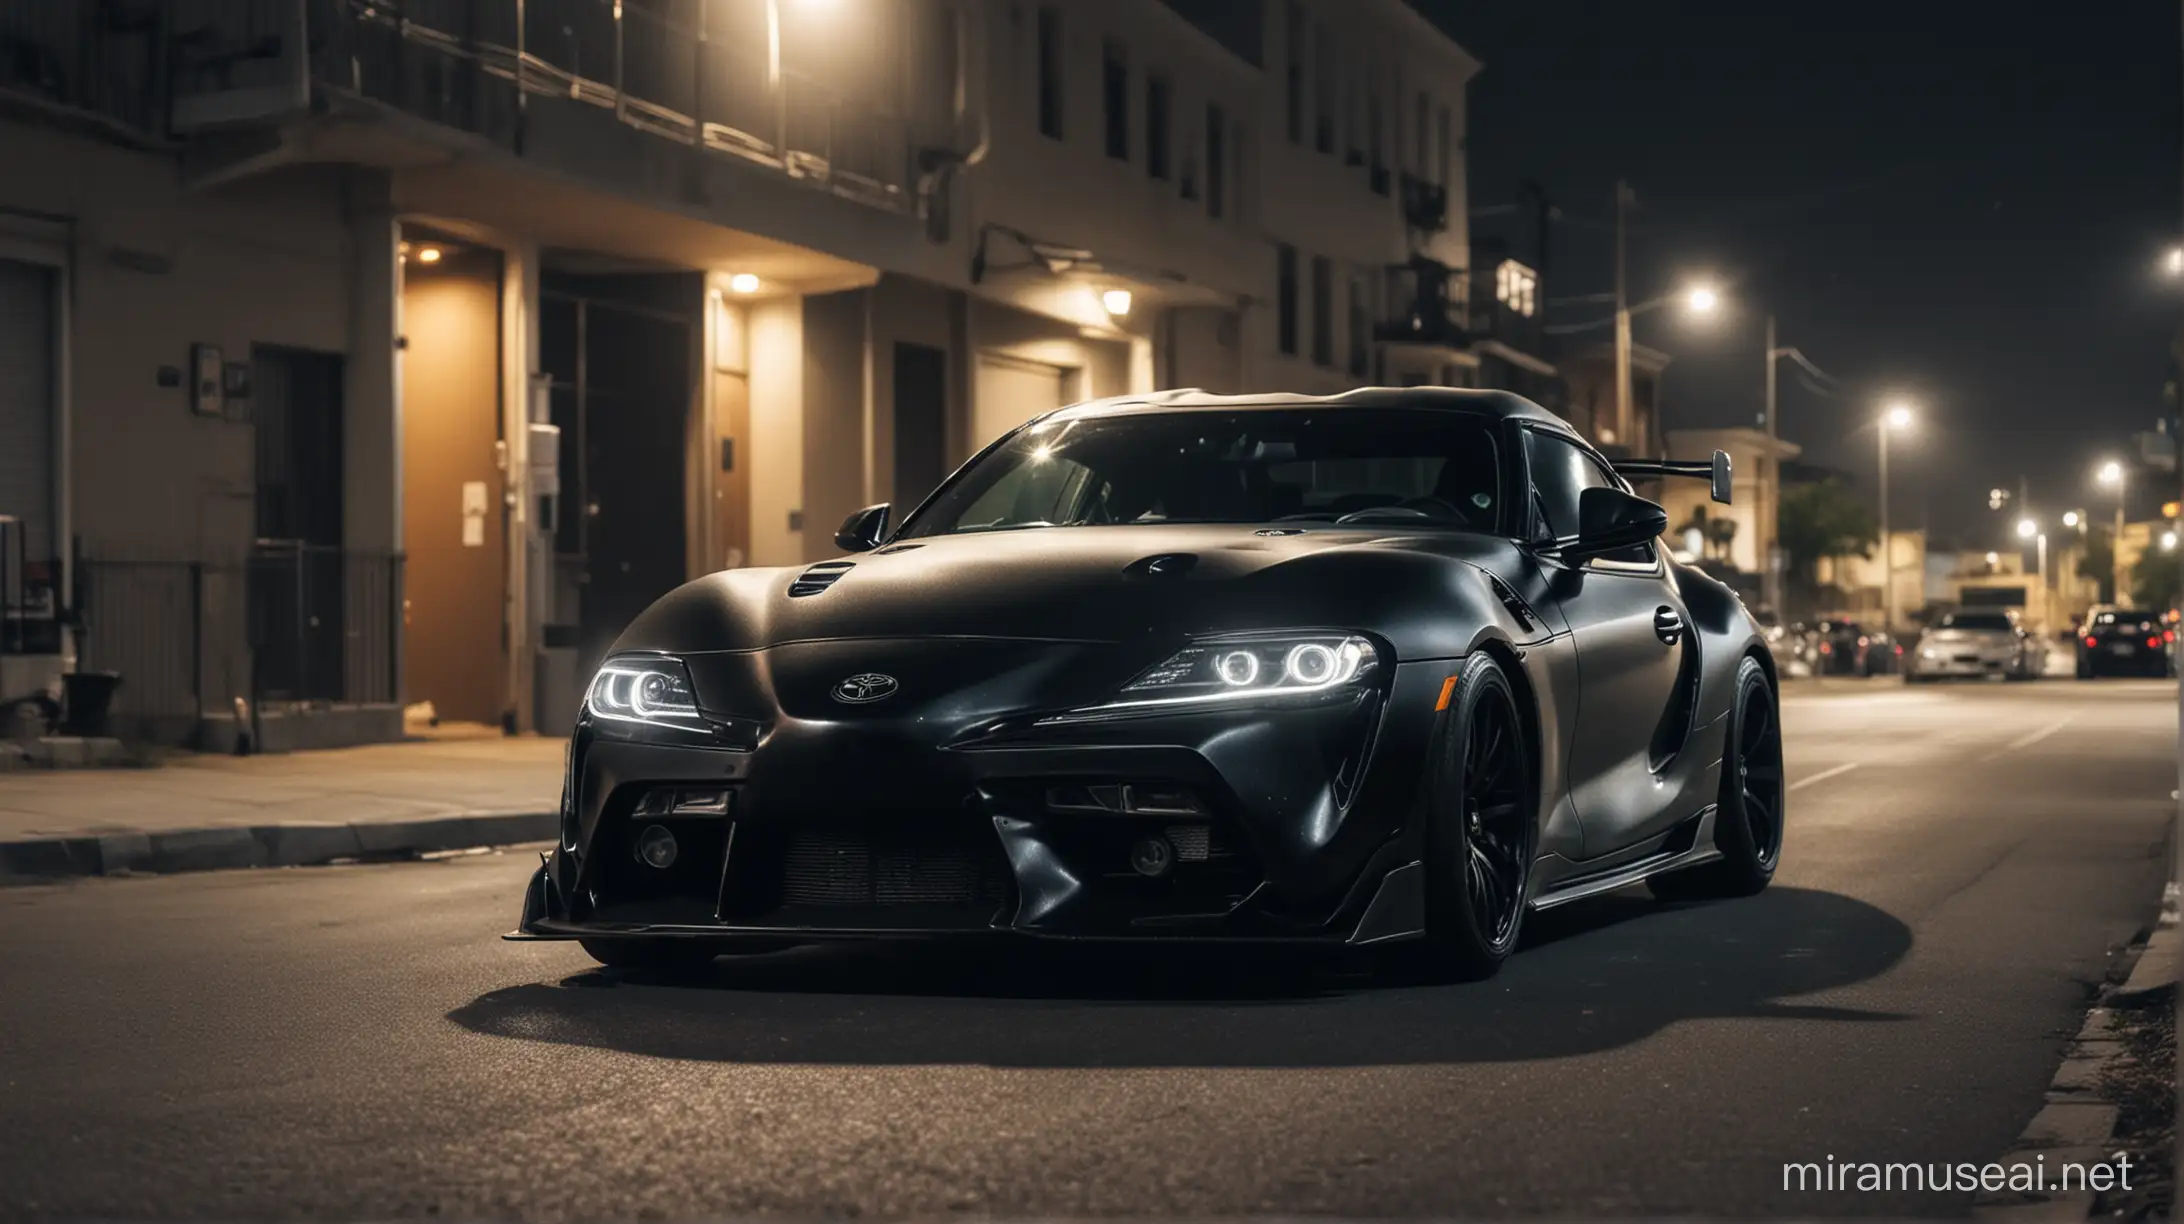 generate a photo of black aggresive toyota supra with a street in the background at night
